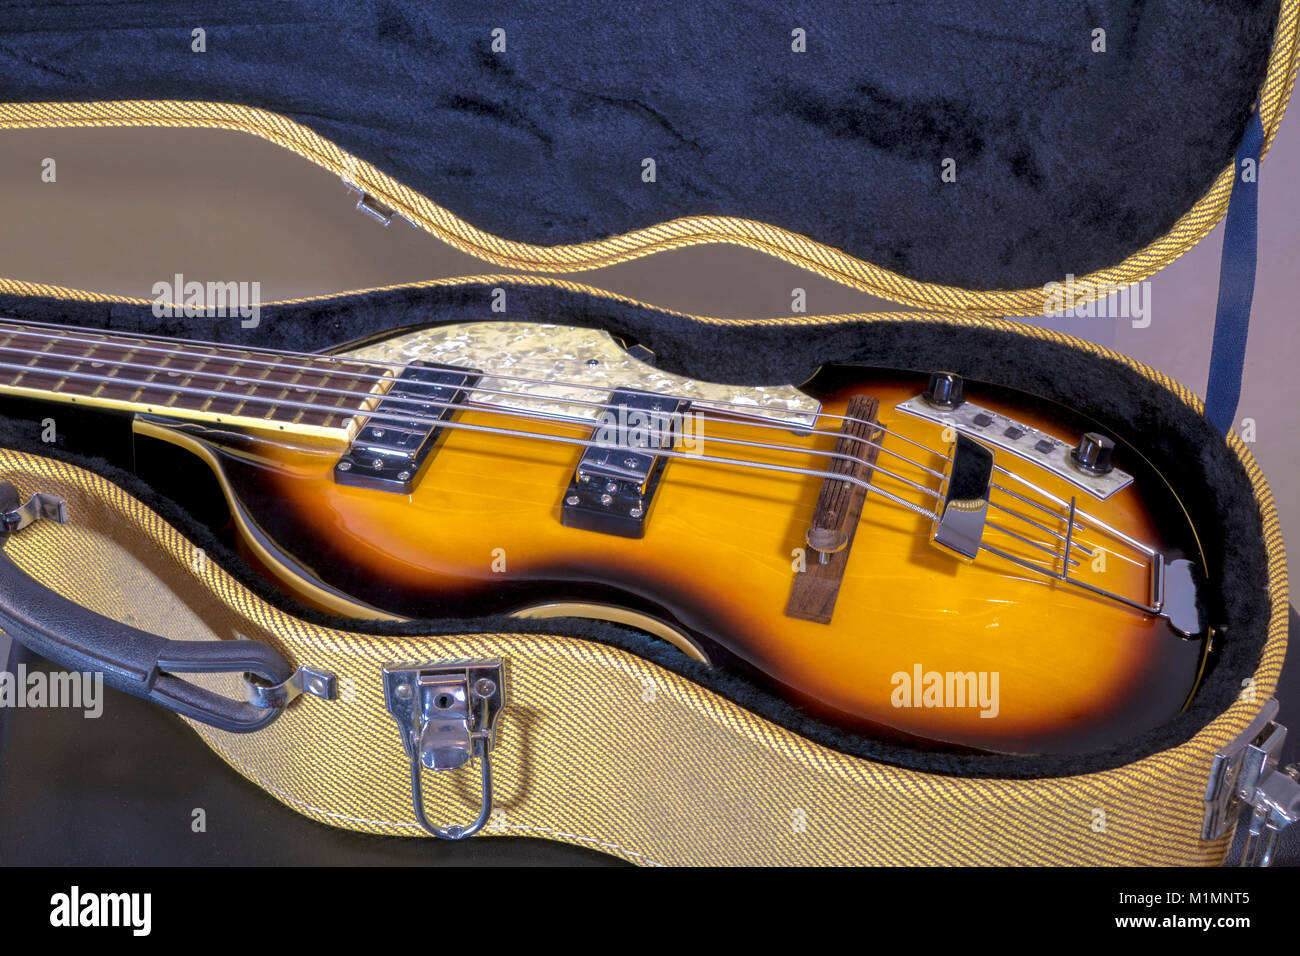 Beatles / Beatle violin bass guitar. Original models of this iconic shape instrument were introduced in the 1950s, with replicas like this still made. Stock Photo